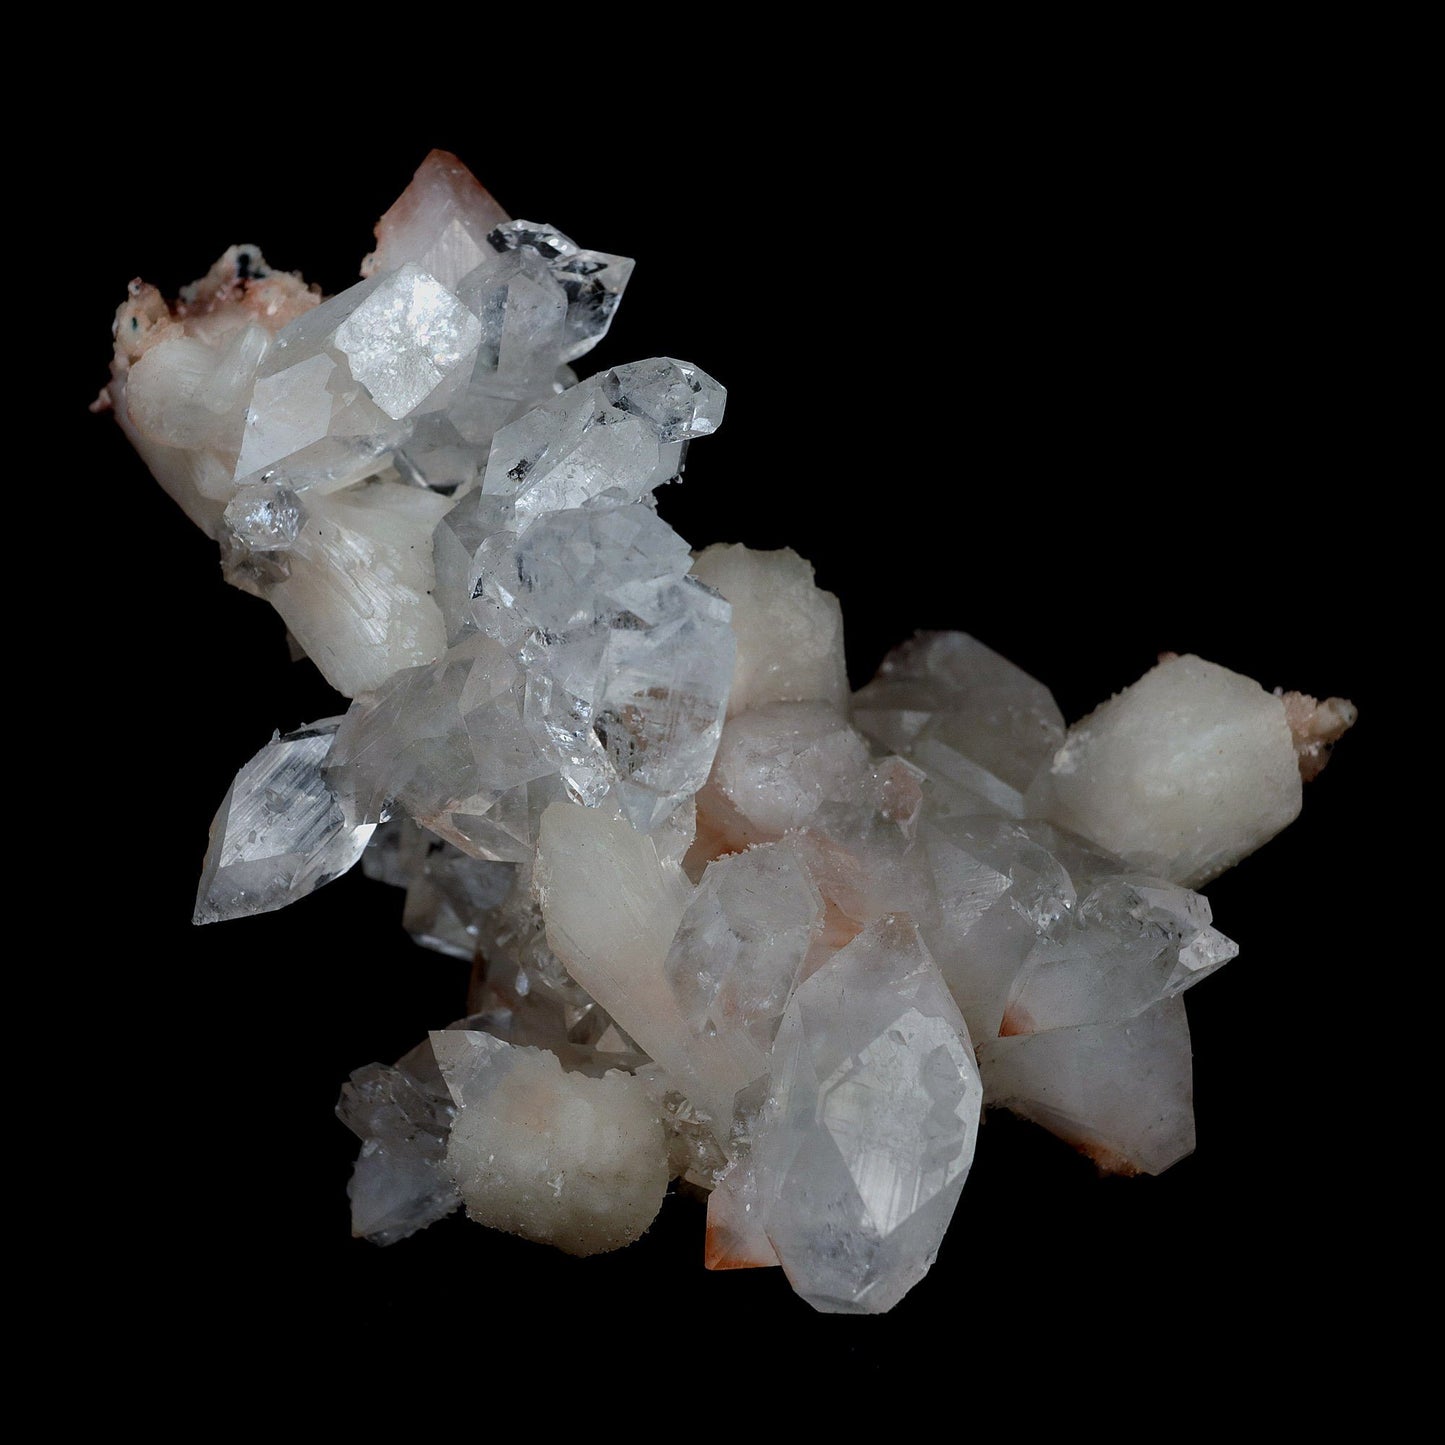 Gemmy Pointed Apophyllite with Stilbite Barbellate Formation # B 4167  https://www.superbminerals.us/products/gemmy-pointed-apophyllite-with-stilbite-barbellate-formation-b-4167  Features:Beautiful gem Apophyllite crystals decorated by Stilbite. It displays superb colorless up to bit reddish crystals. They have razor sharp octahedral shape. The crystals have glassy luster and pretty striations. The Apophyllite is from translucent to transparent and gemmy. Stilbite grow on the Apophyllite